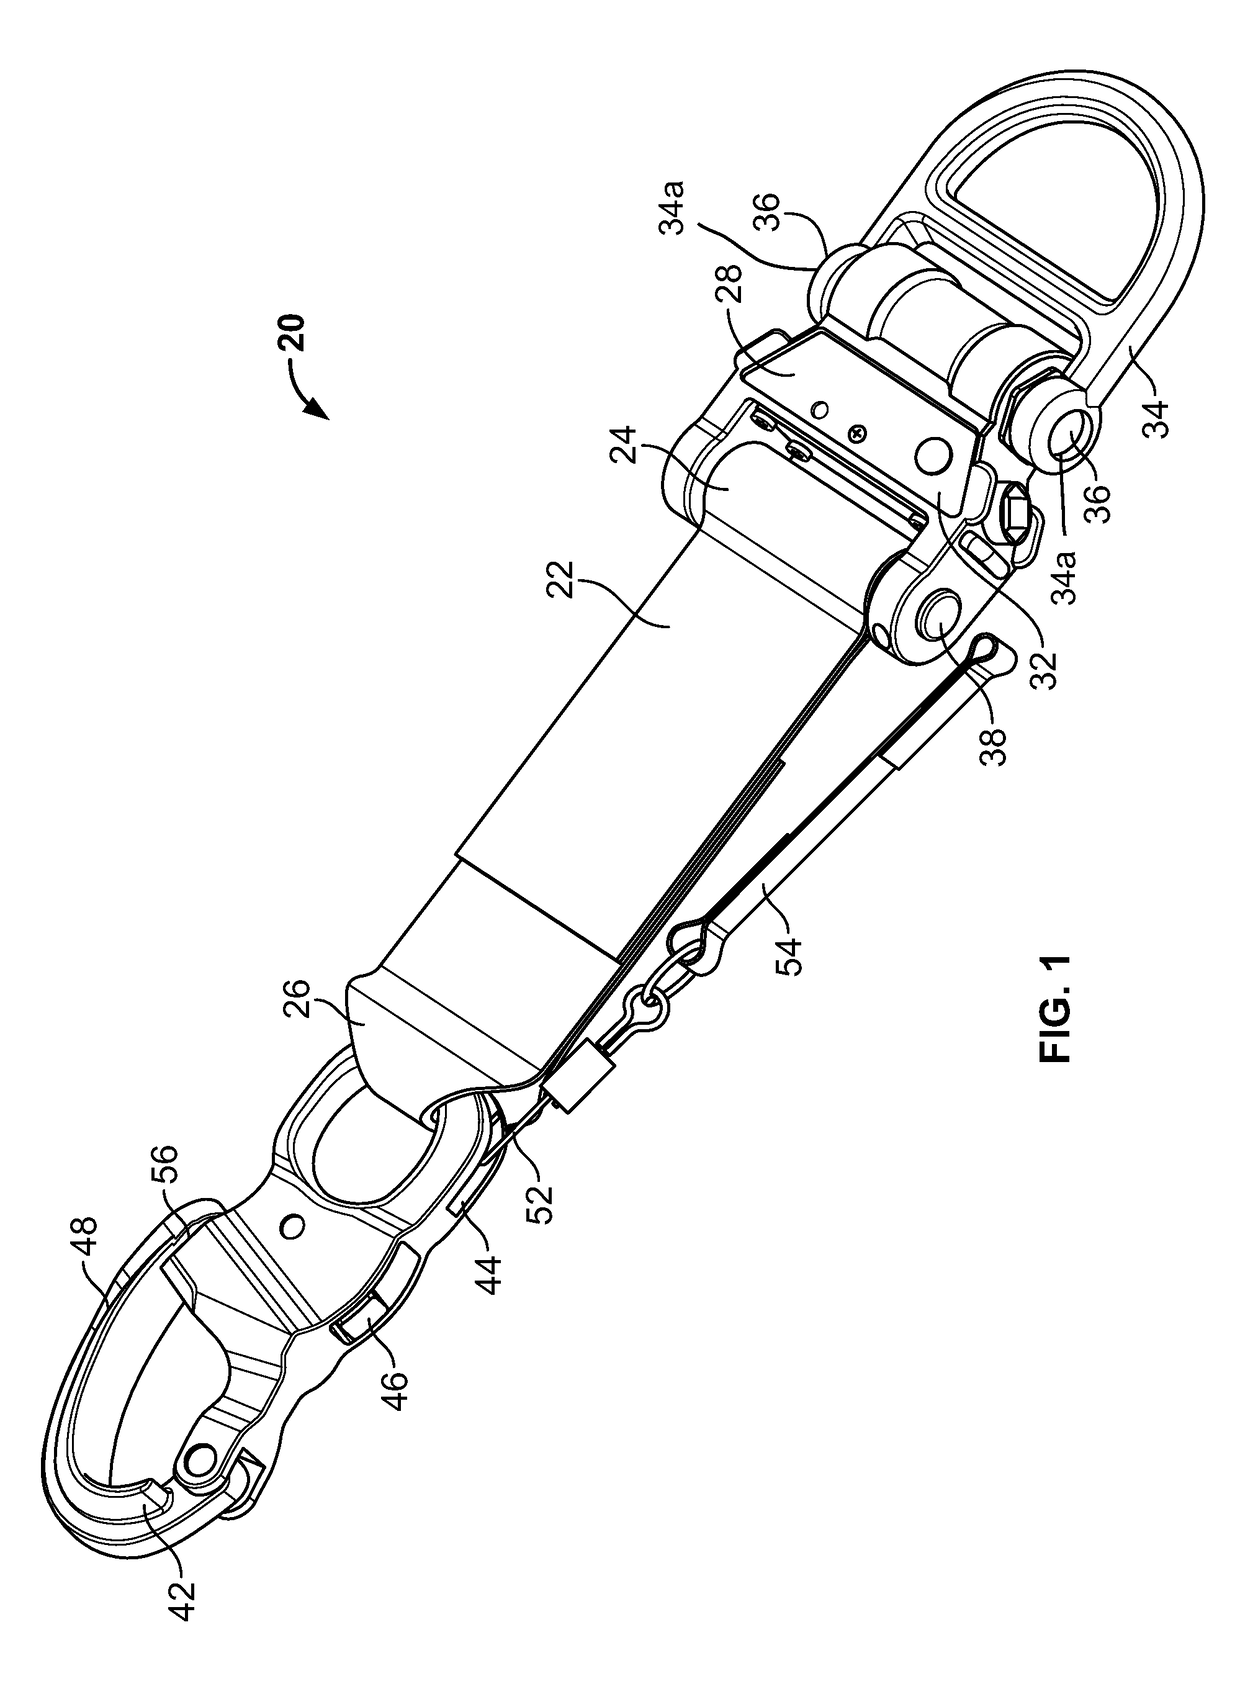 Restraint system with dual release mechanisms